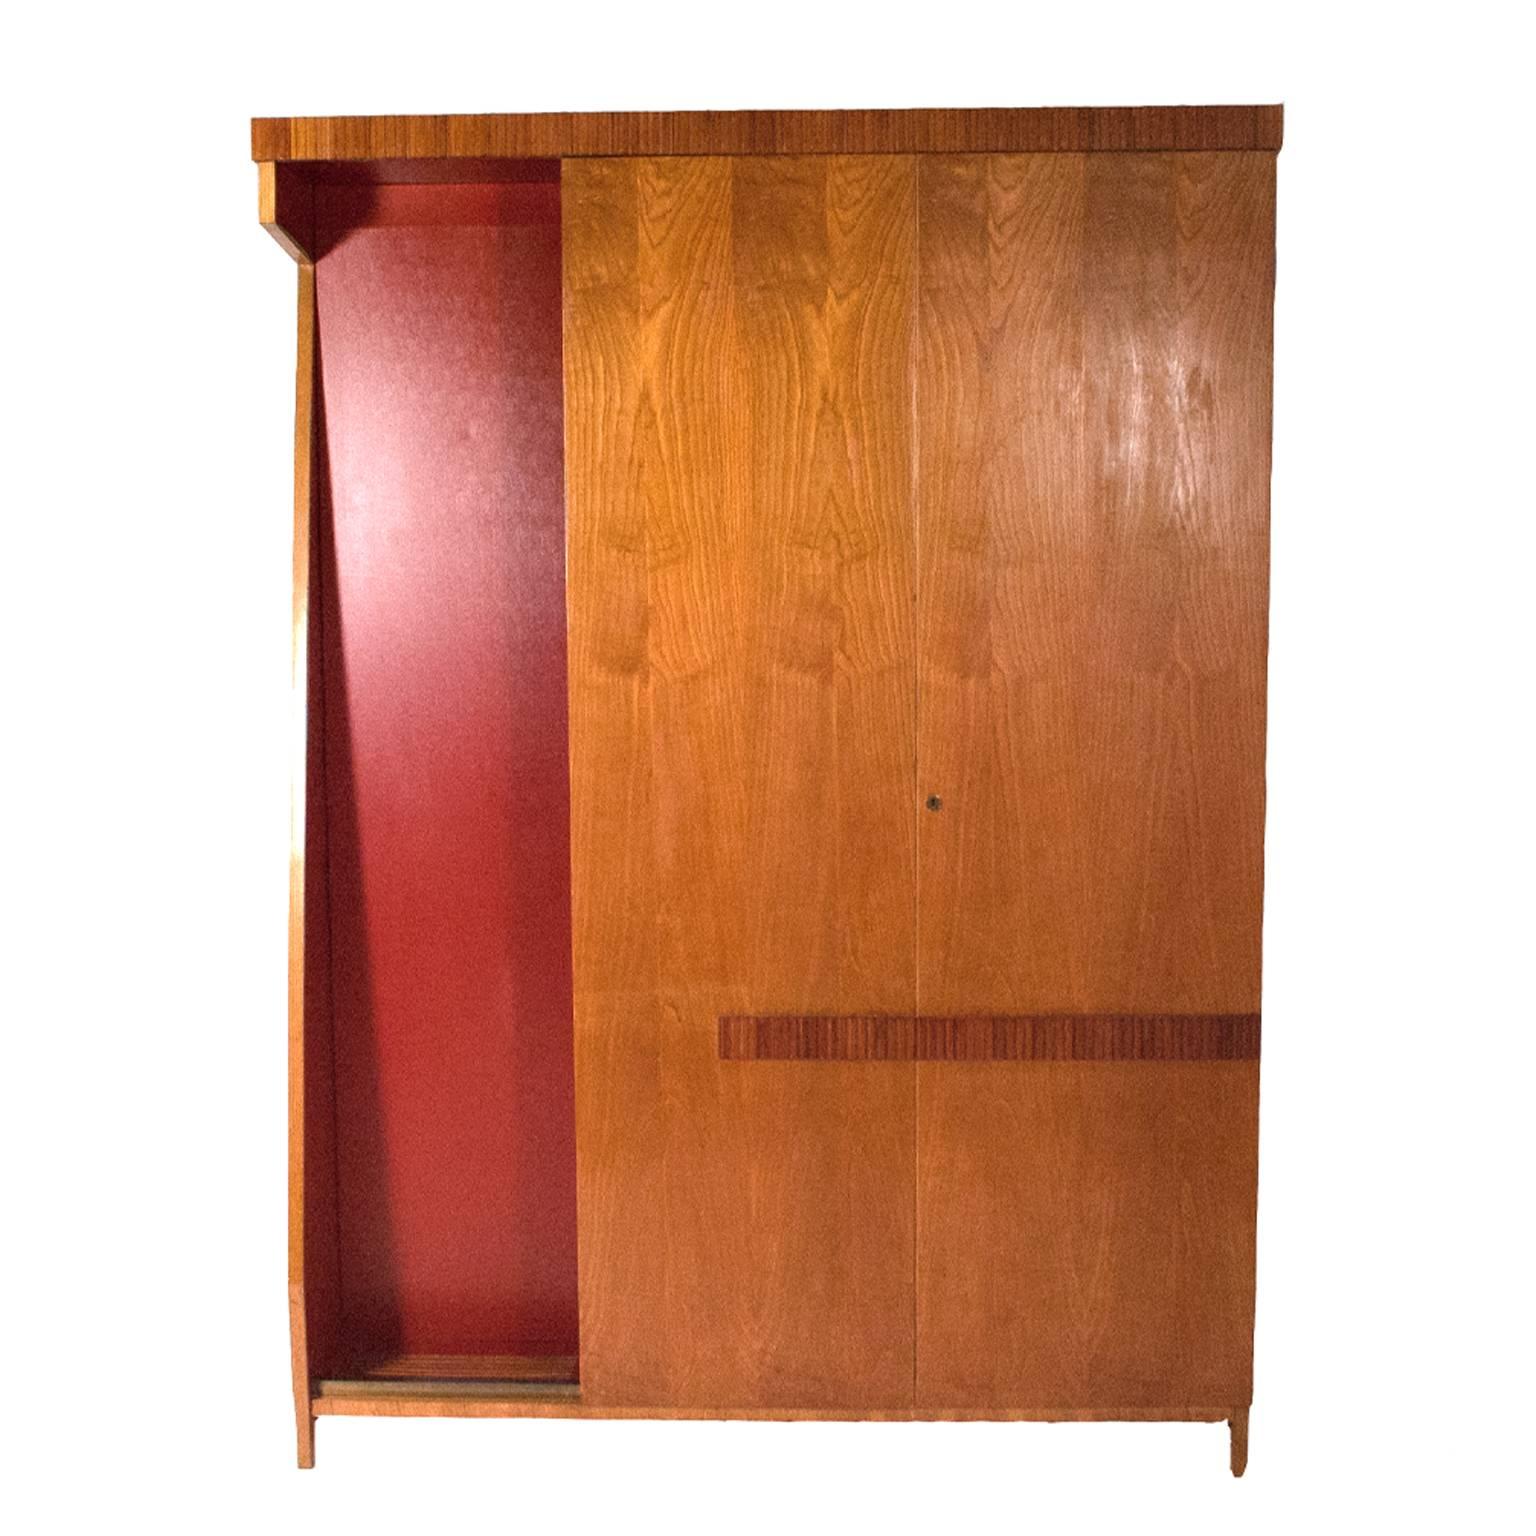 Large wardrobe made of ashwood with two doors in front that reveal small drawers, half door on side of wardrobe which opens to show shelves and tie rack. With red vinyl design element.